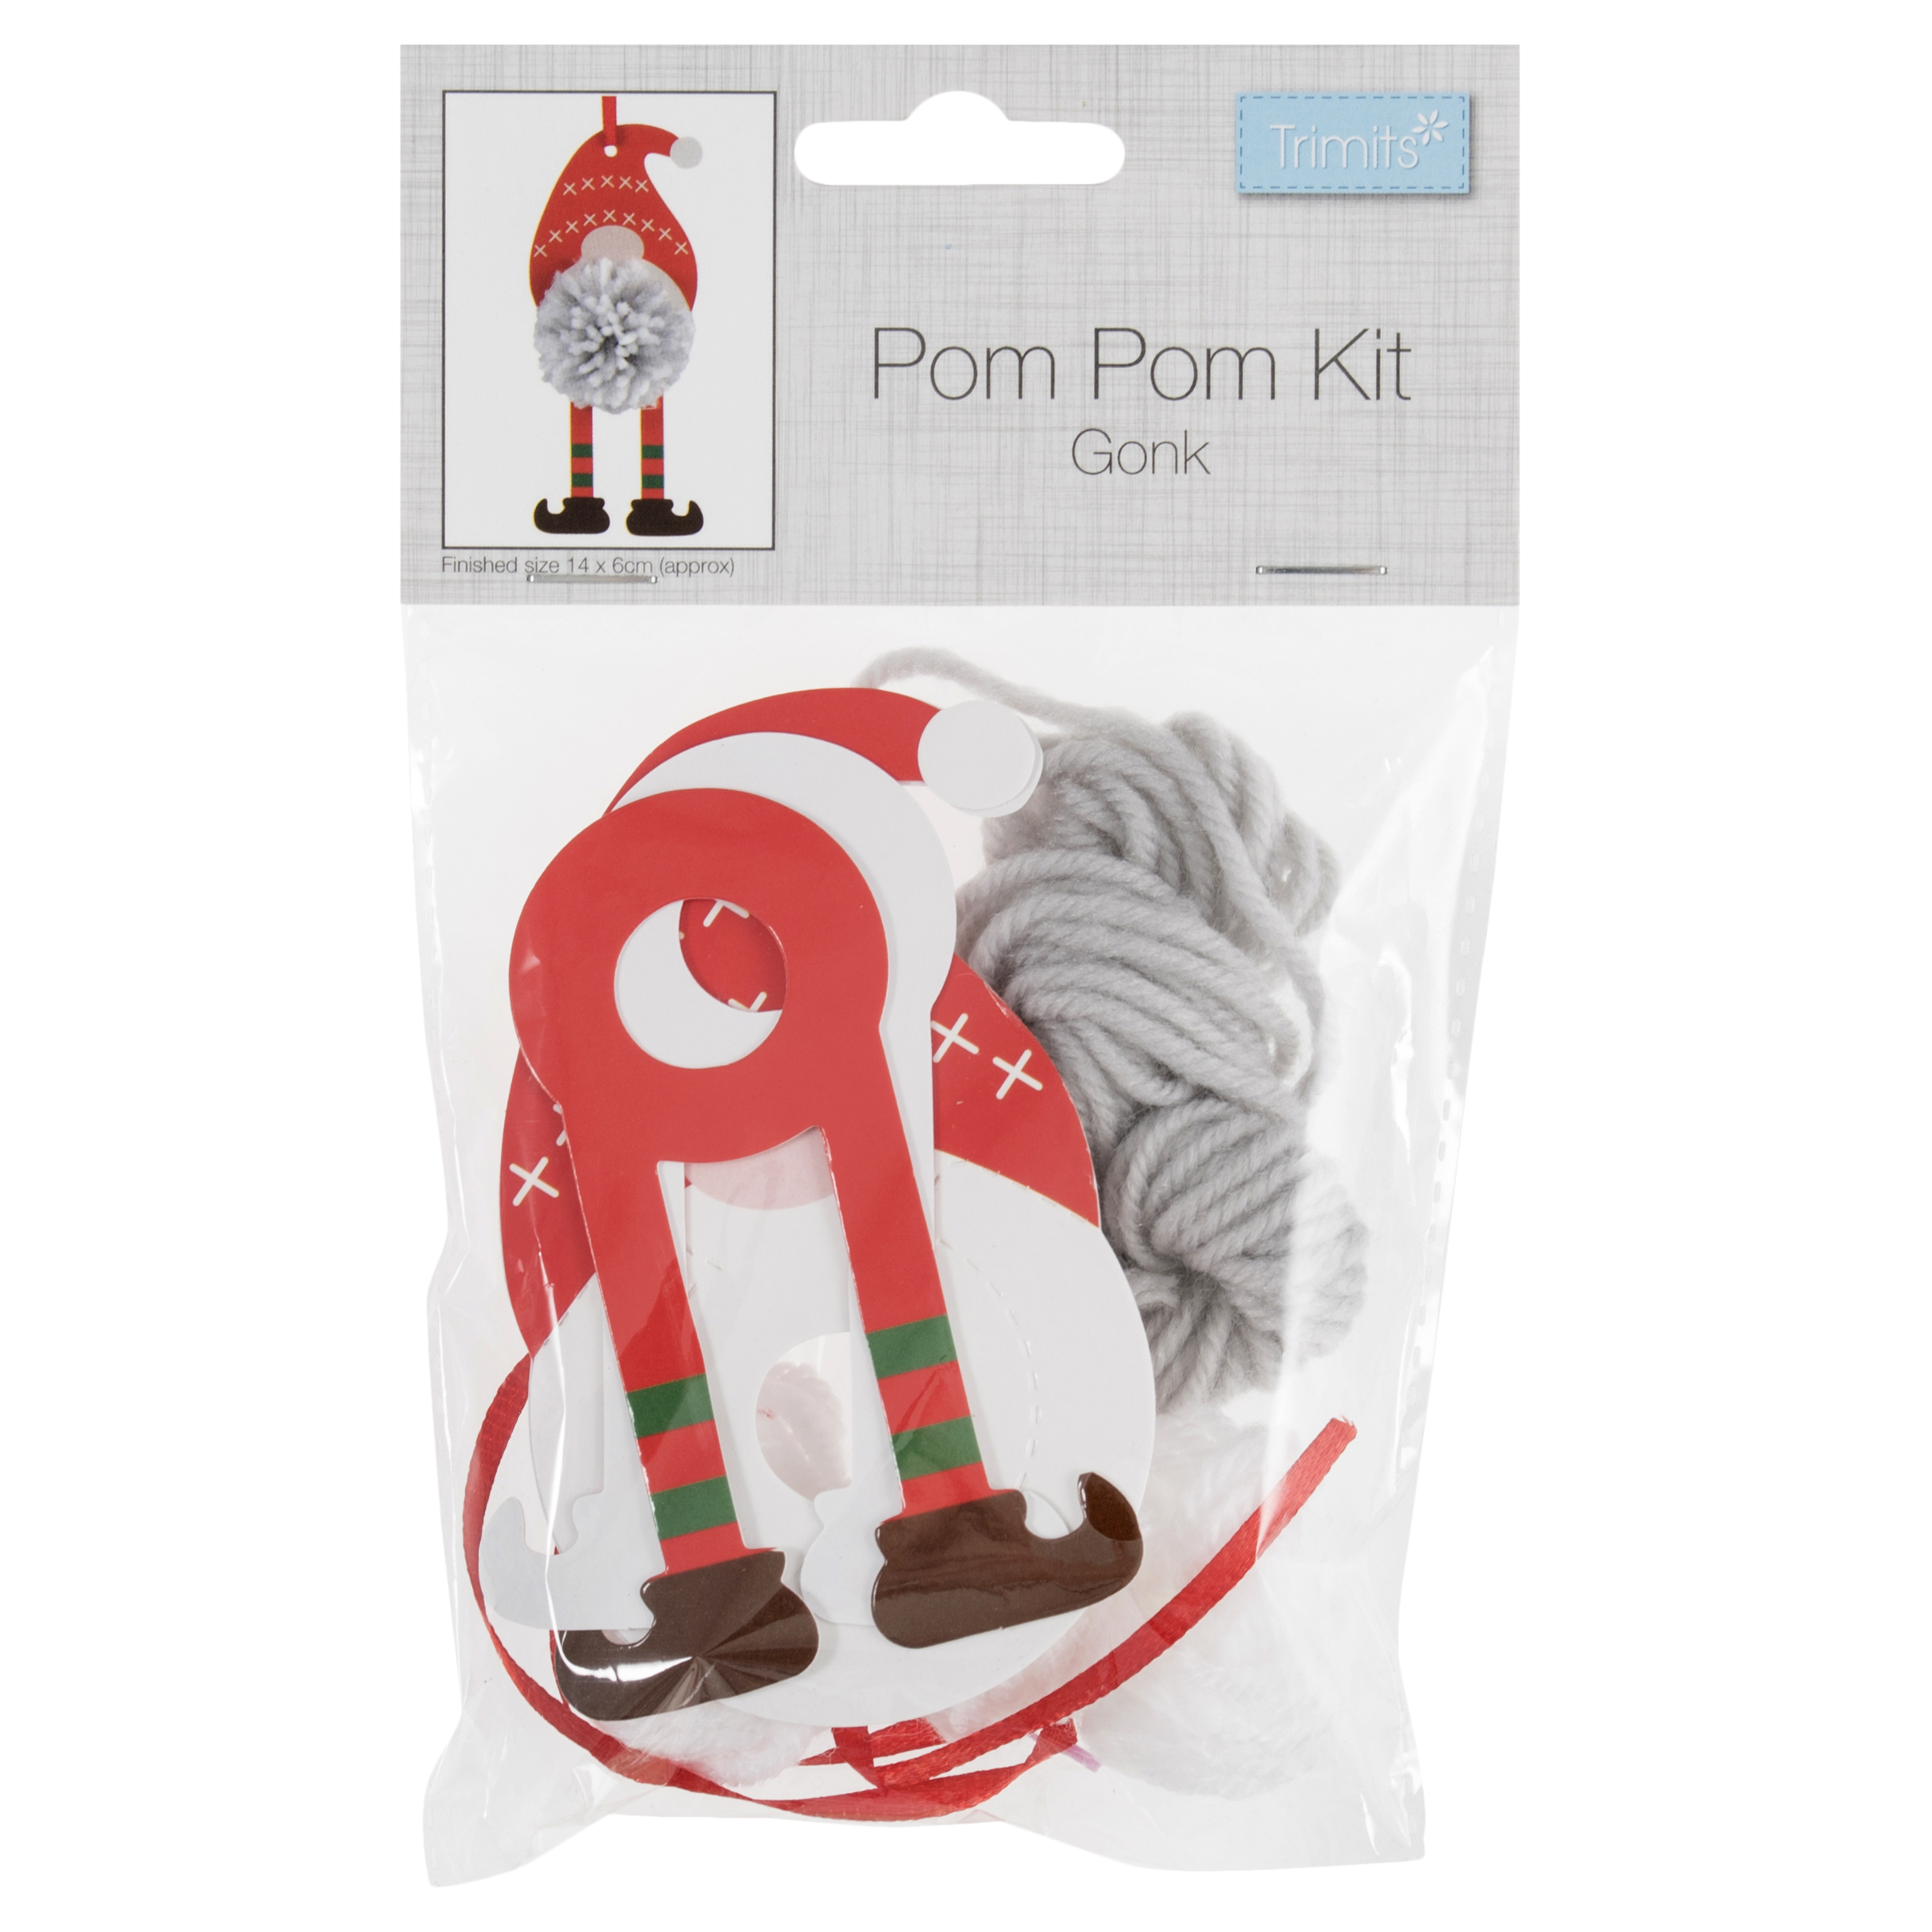 Picture of Pom Pom Decoration Kit: Christmas: Gonk: Pack of 1